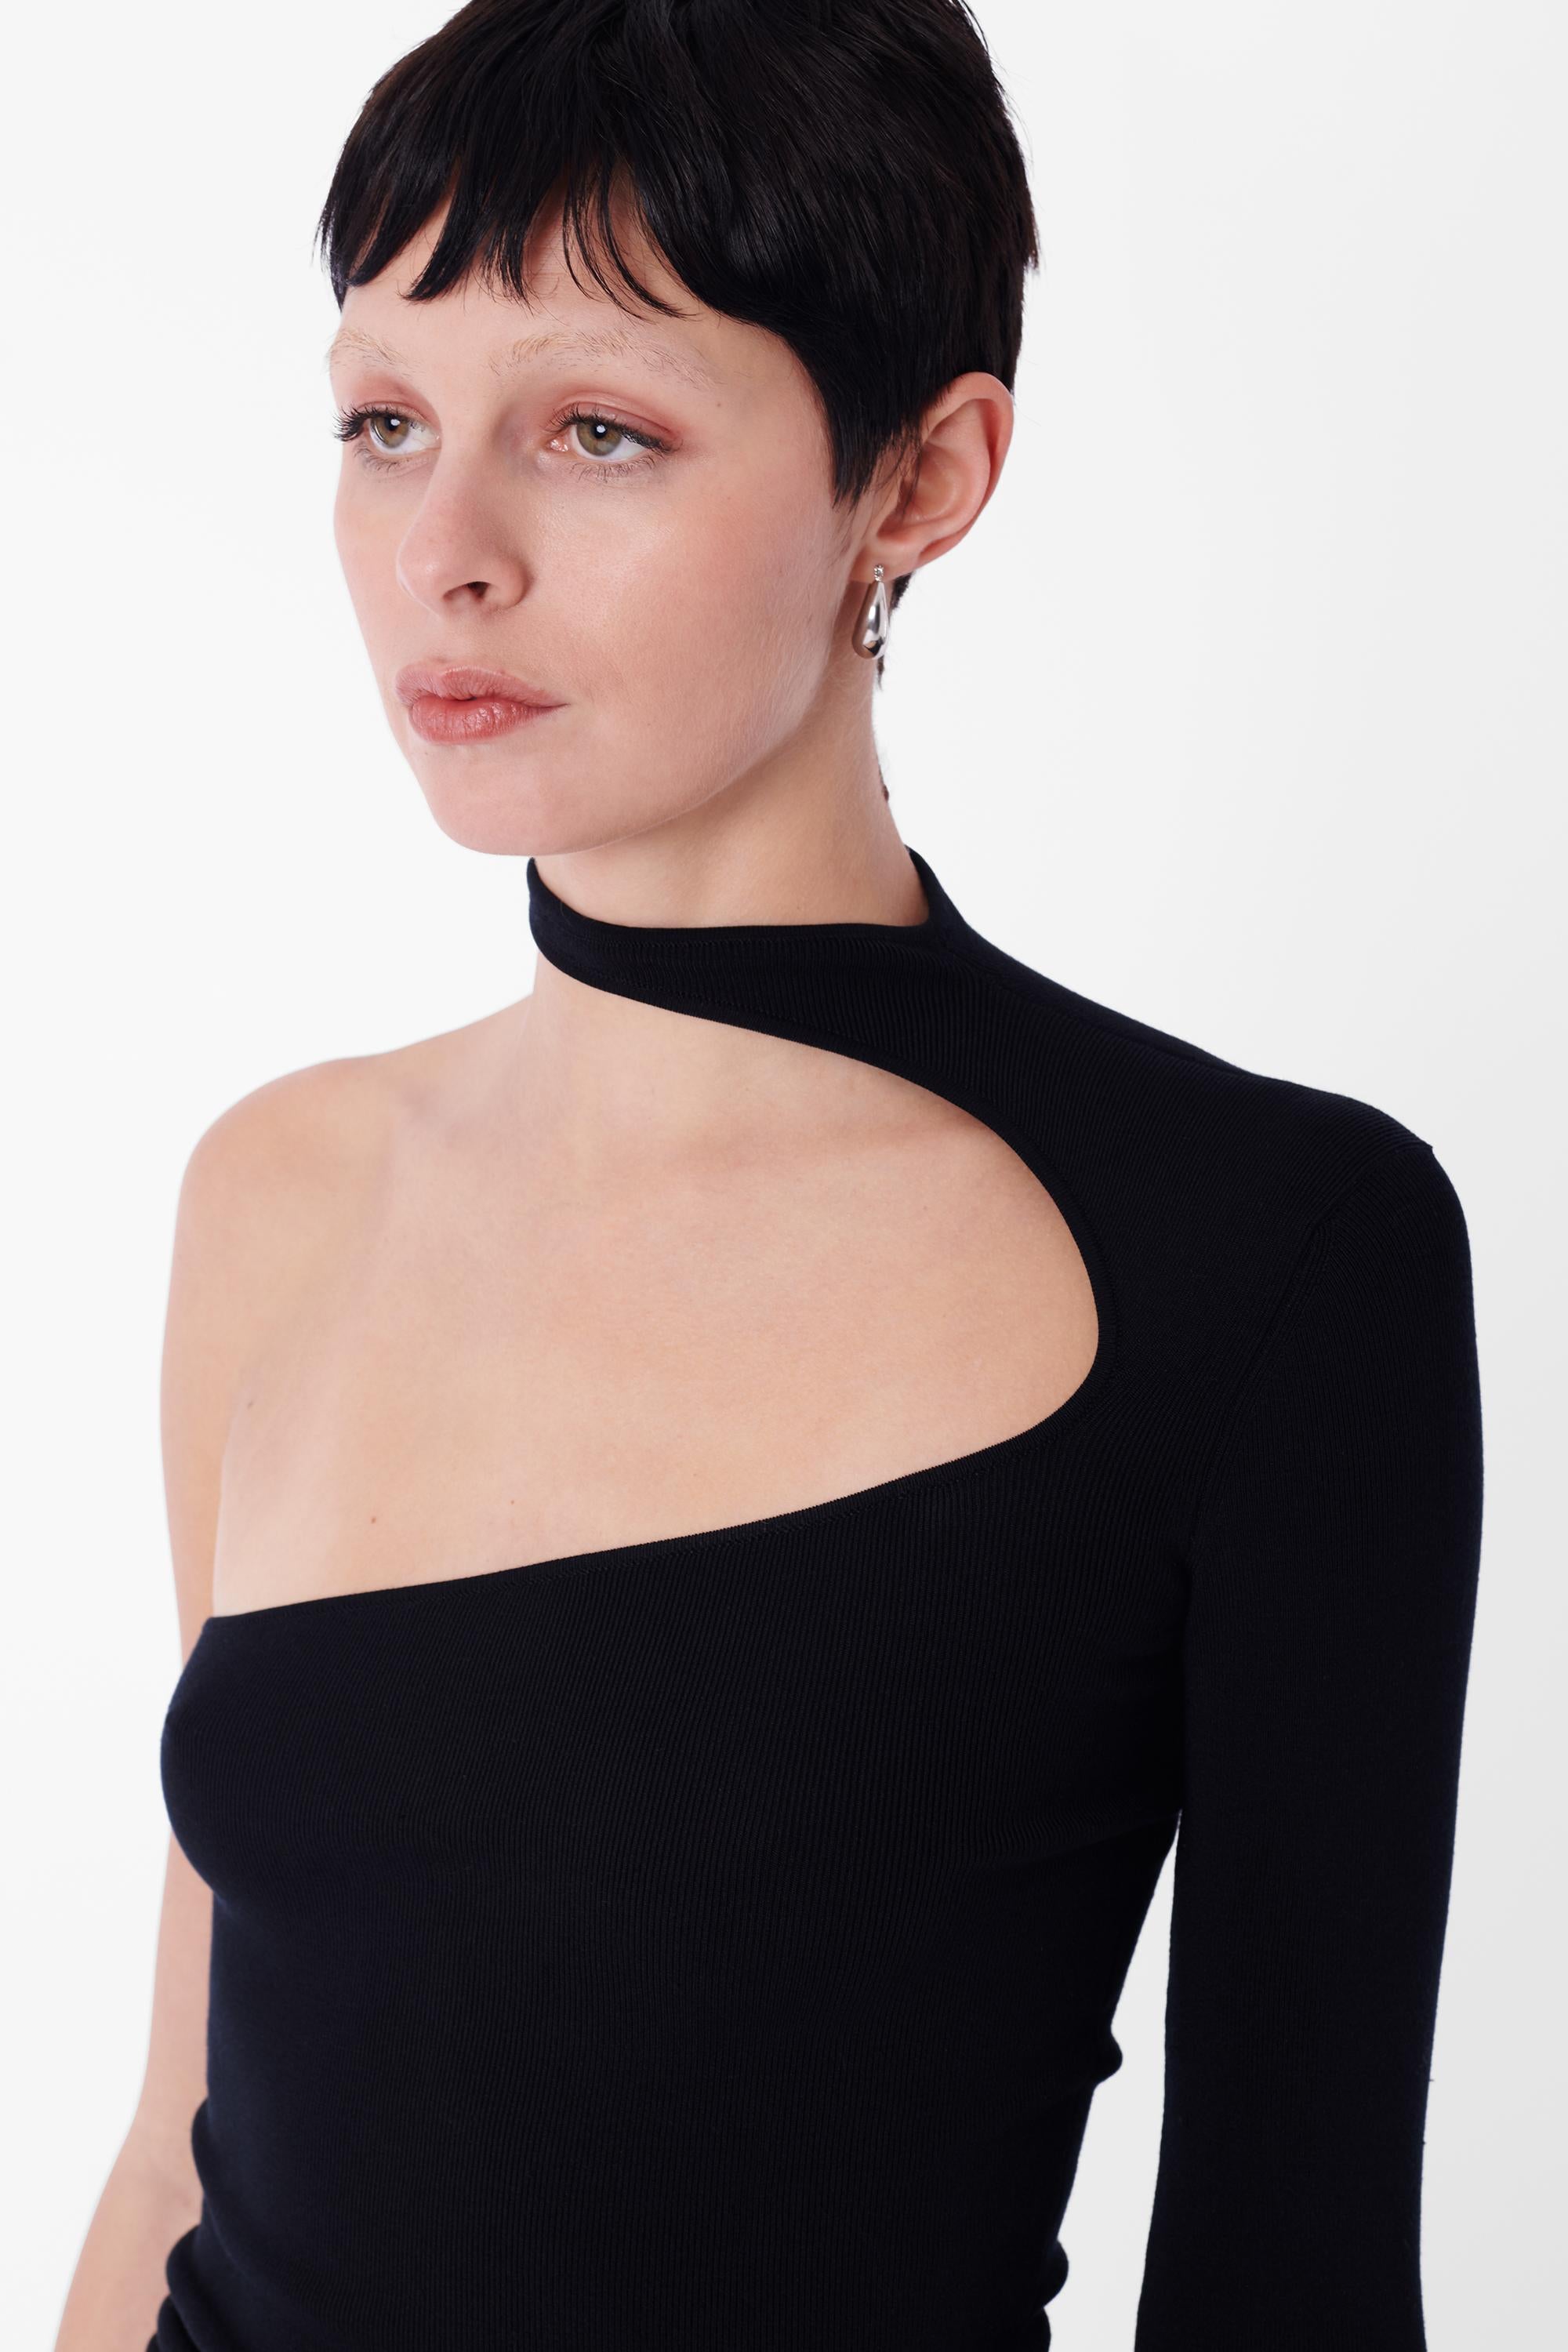 Vintage Tom Ford for Gucci black long sleeve top. Features asymmetric silhouette with open chest detailing and deep neckline in a bodycon fit. In great vintage condition.
Brand: Gucci
Size: UK 10
Color: Black
Modern Size: UK: 10, US: 6, EU: